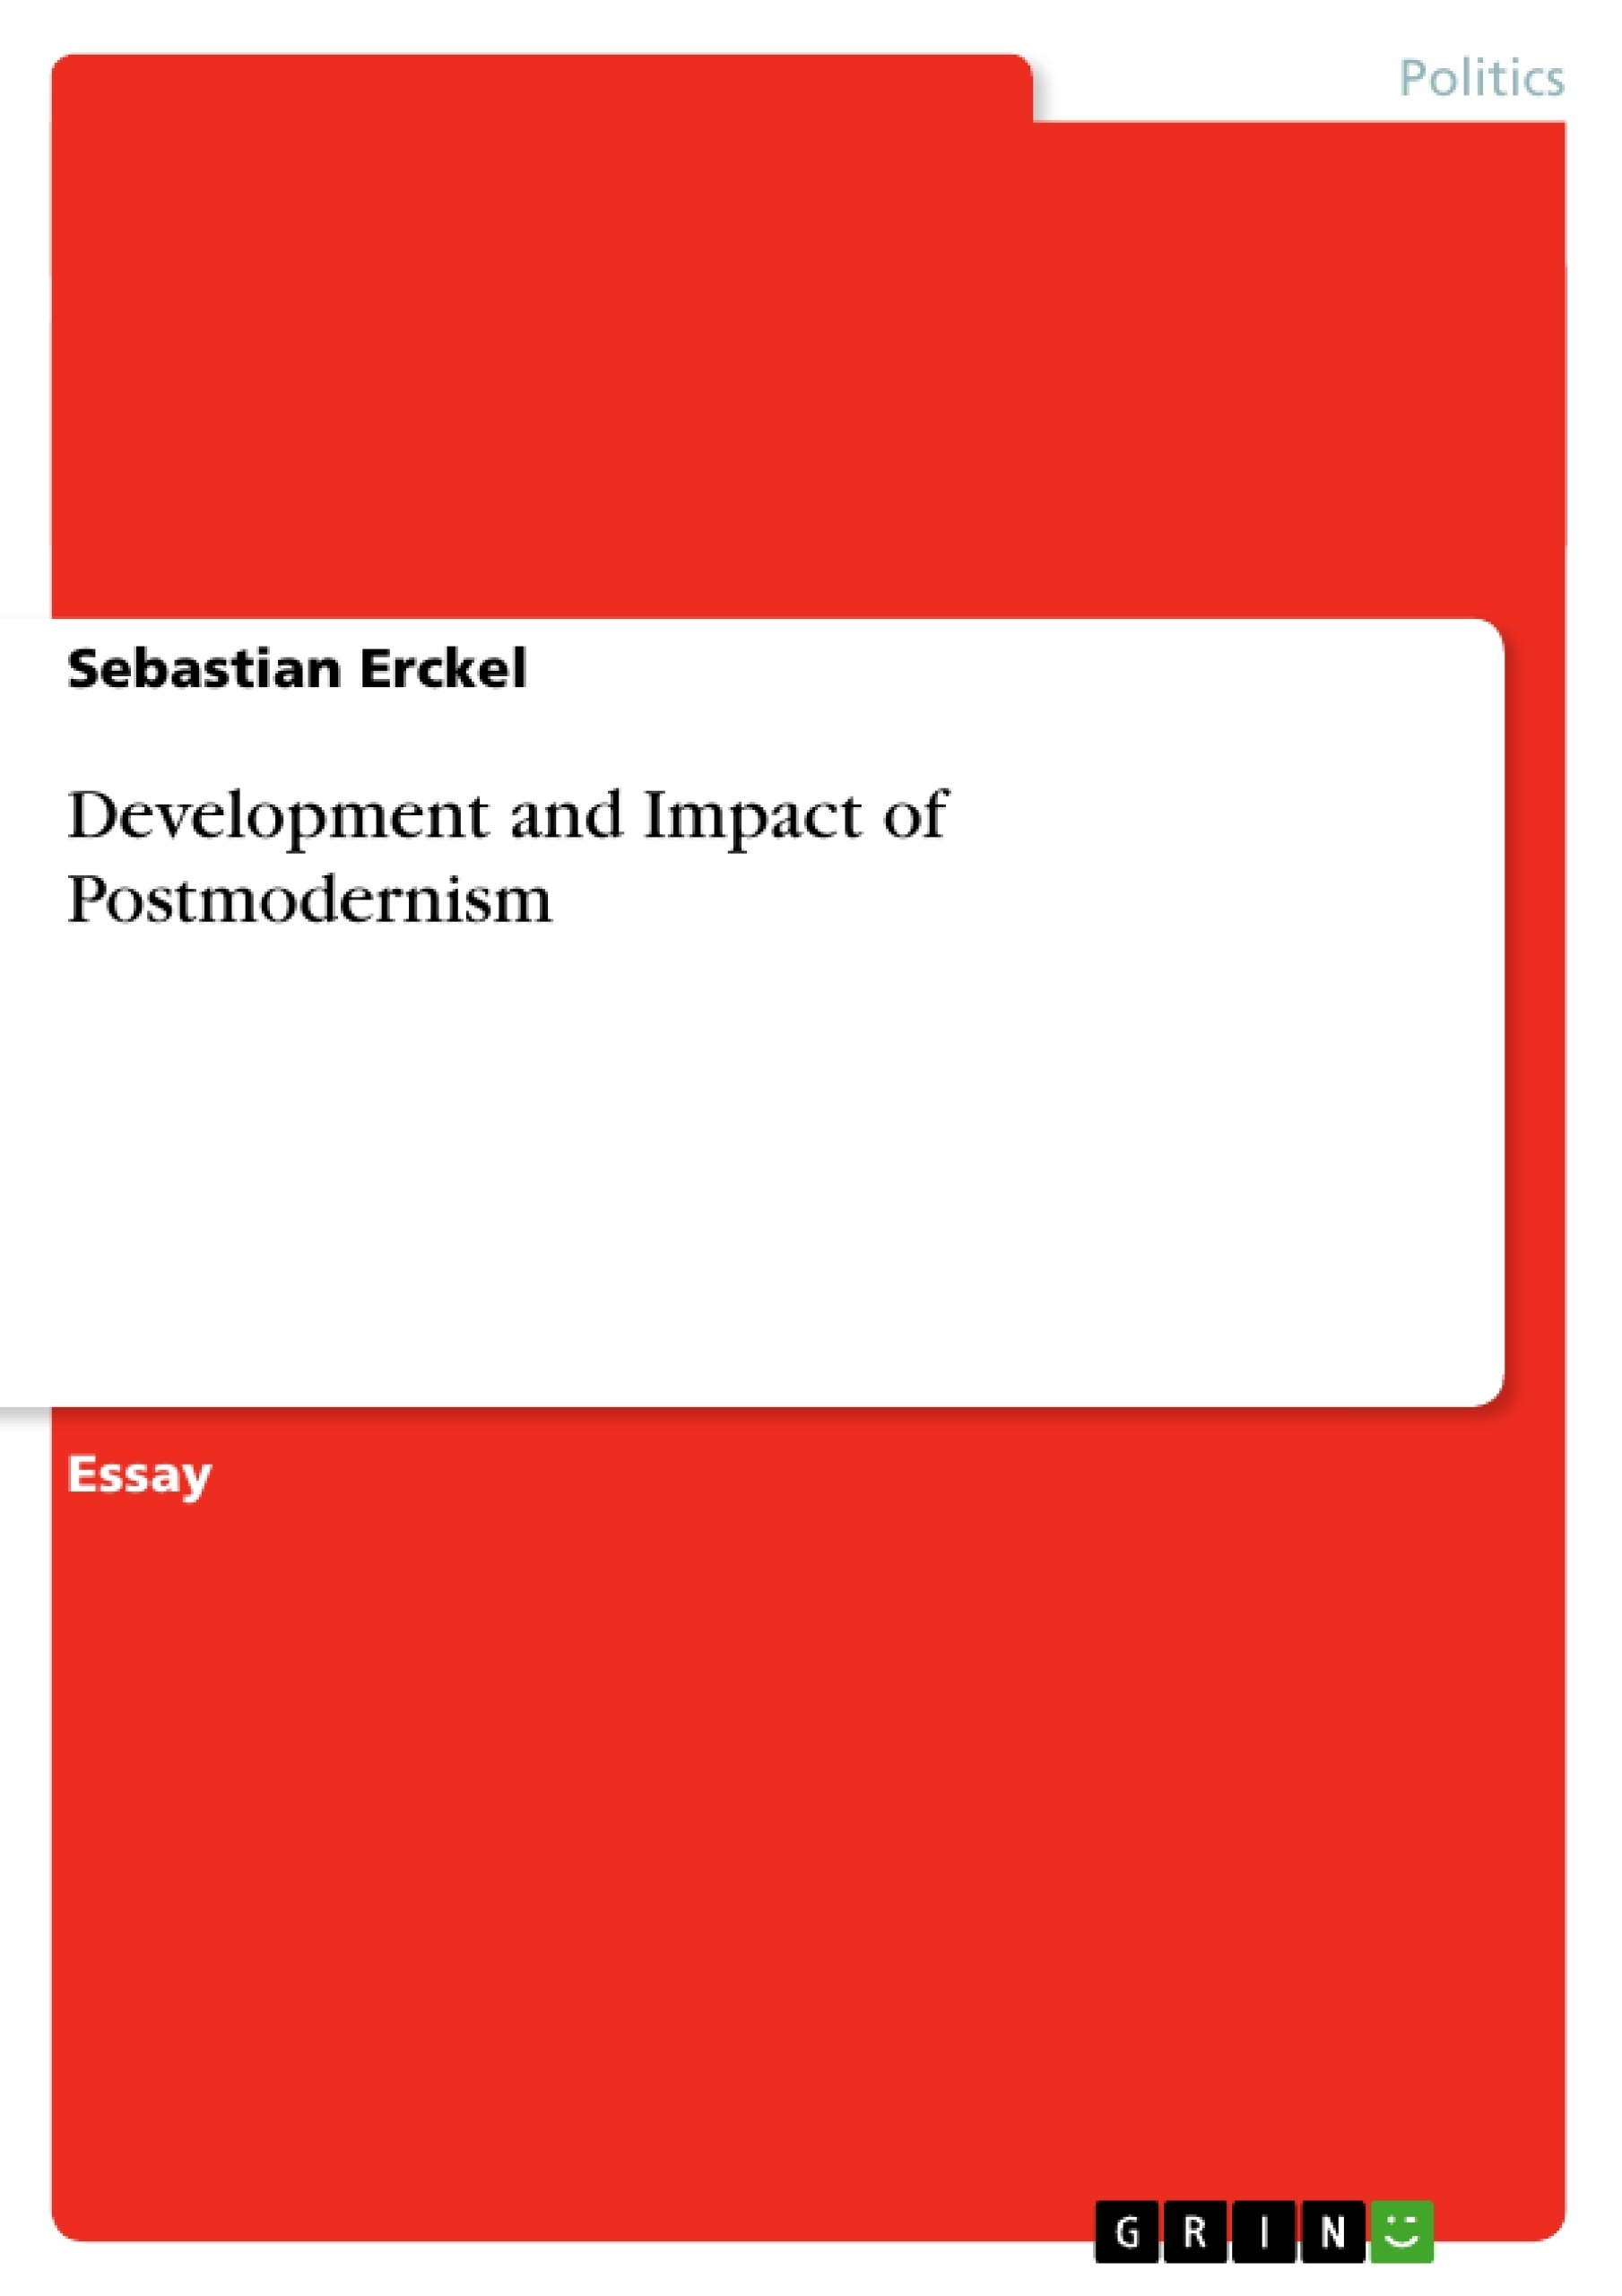 Título: Development and Impact of Postmodernism